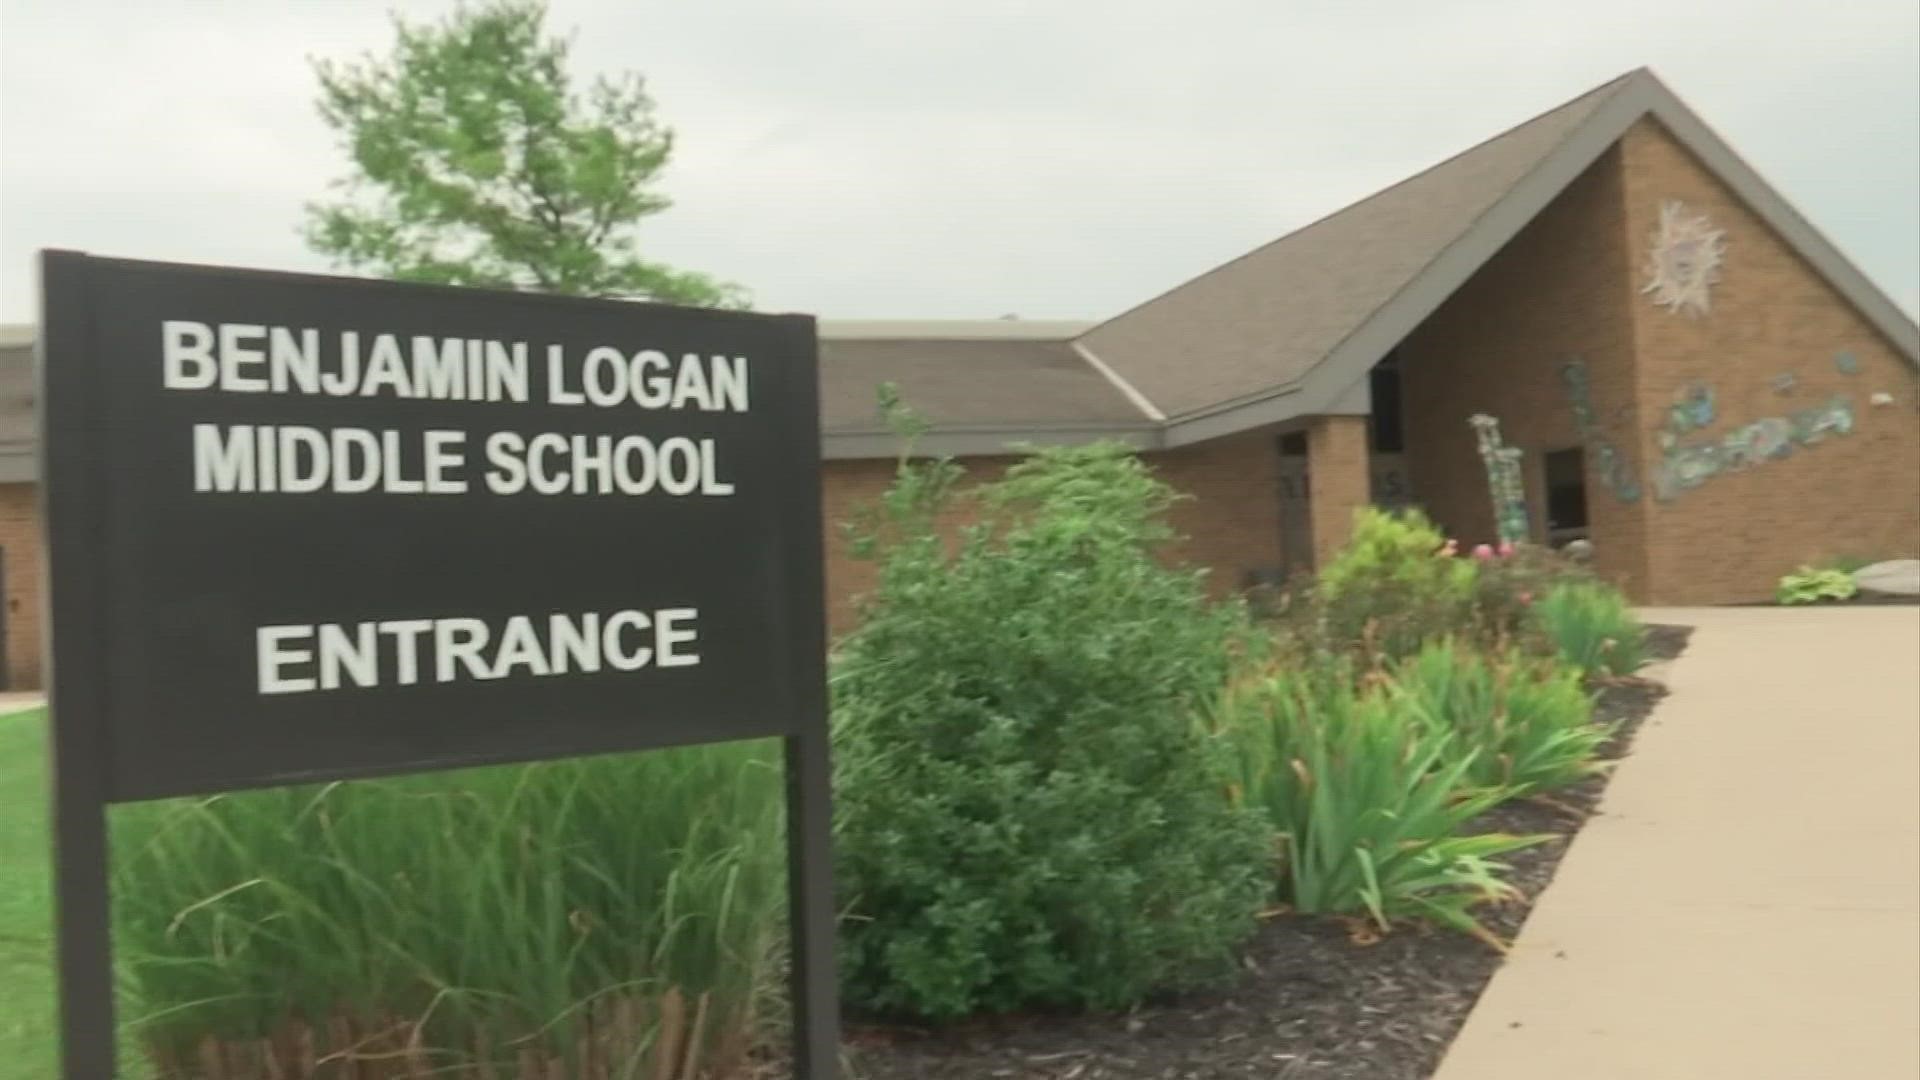 The superintendent of Benjamin Logan Local Schools says arming staff is a safety measure the district should have but one they hope to never use.